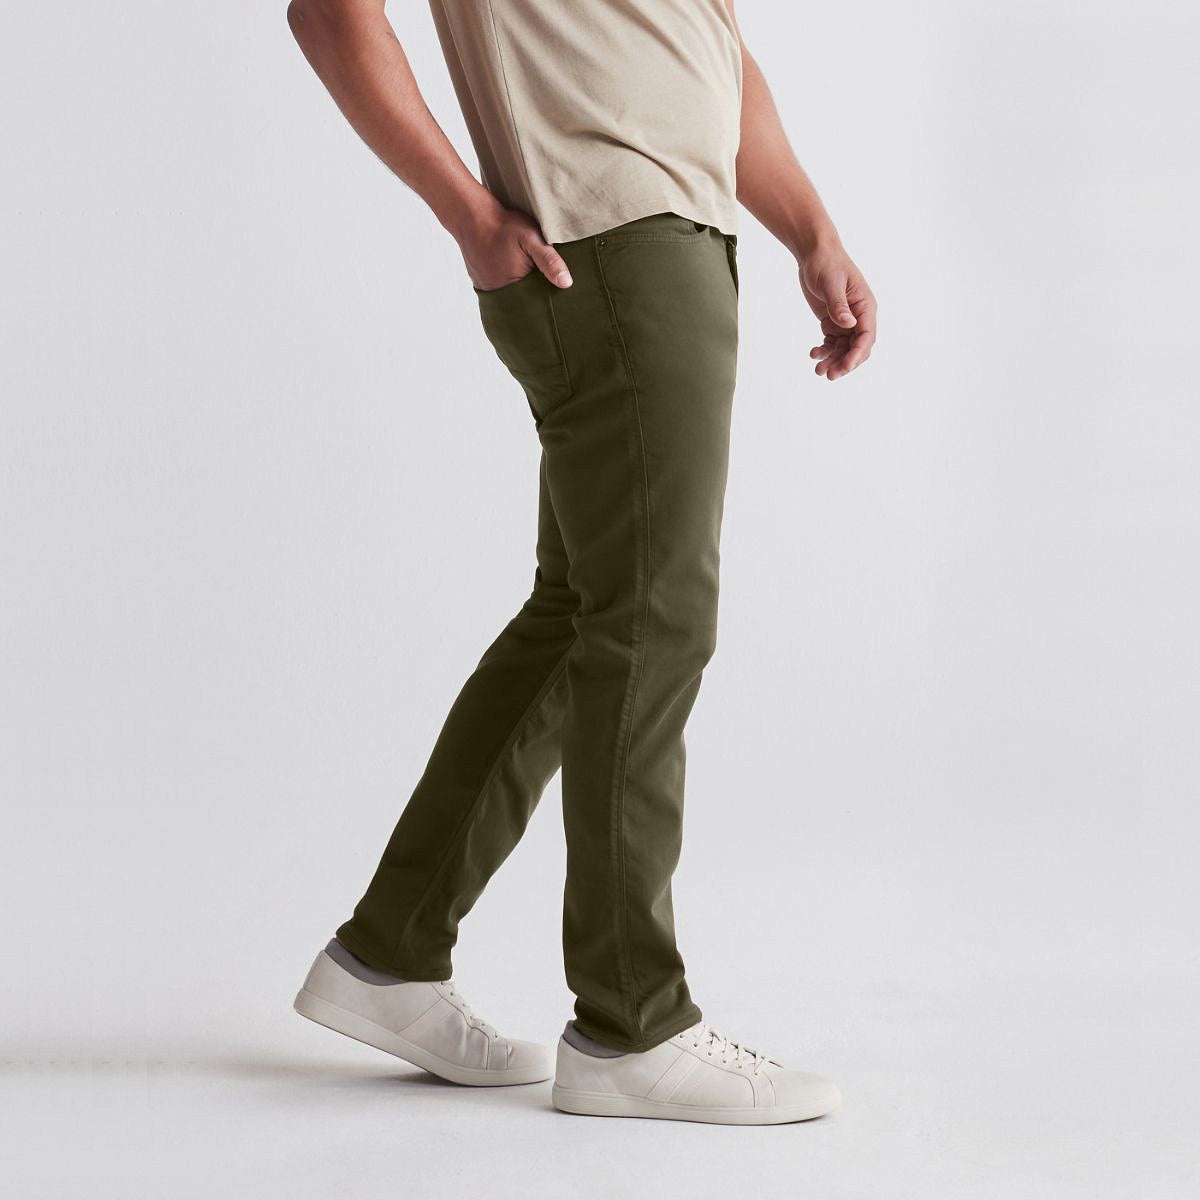 Duer - Men's No Sweat Pant Relaxed Taper  - Army Green